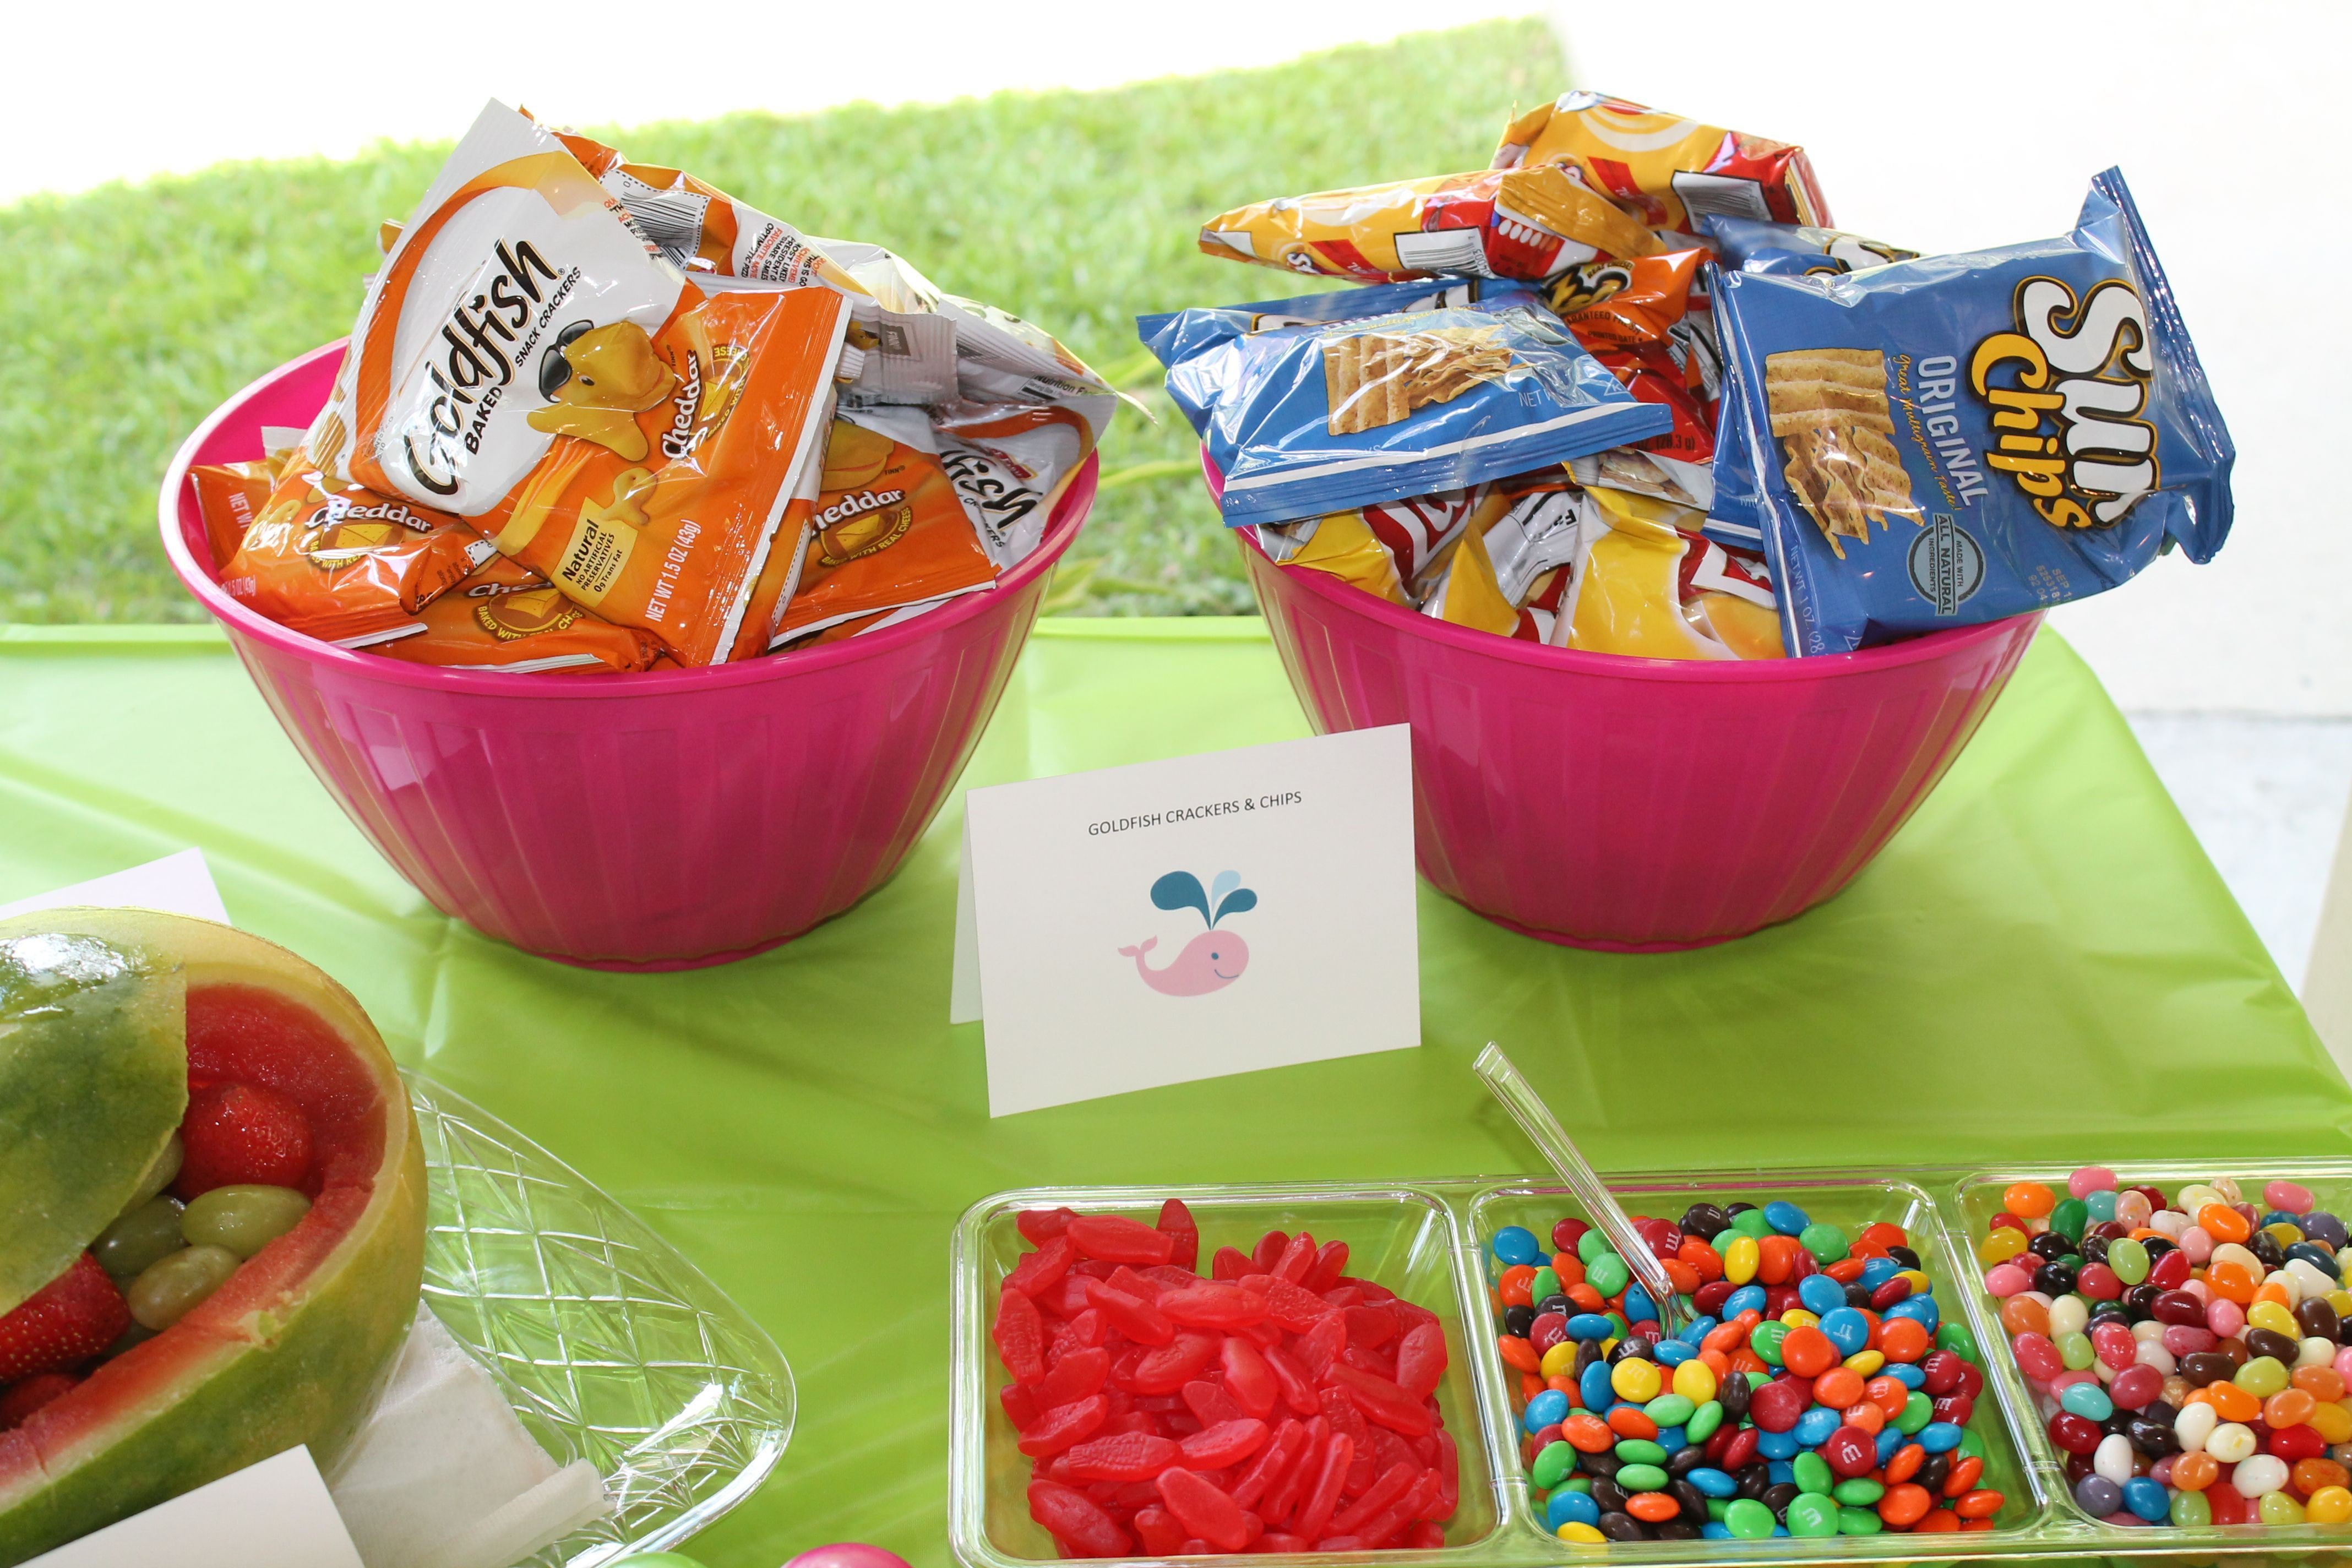 Food Ideas For Pool Party
 Goldfish crackers fit the theme but the chips were more